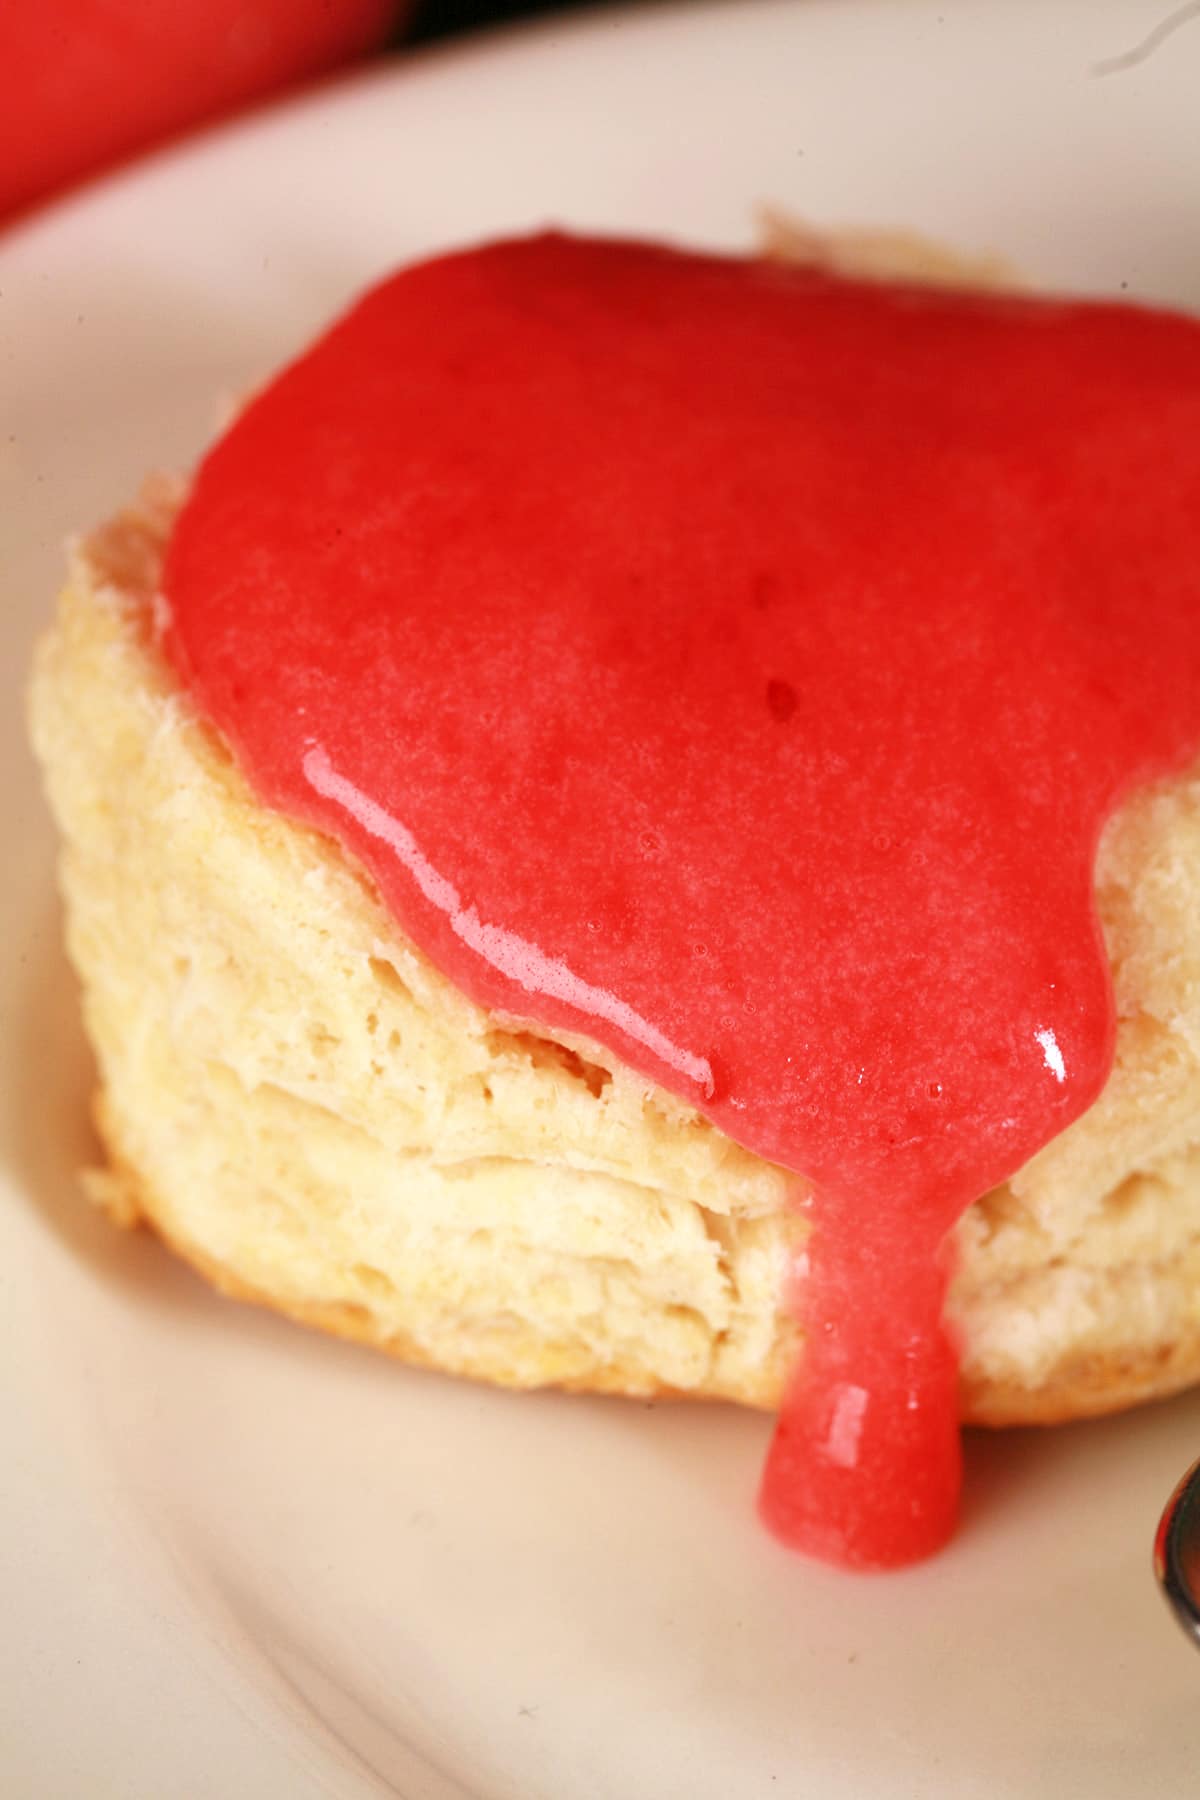 A biscuit on a white plate, with cranberry curd dripping off the biscuit.